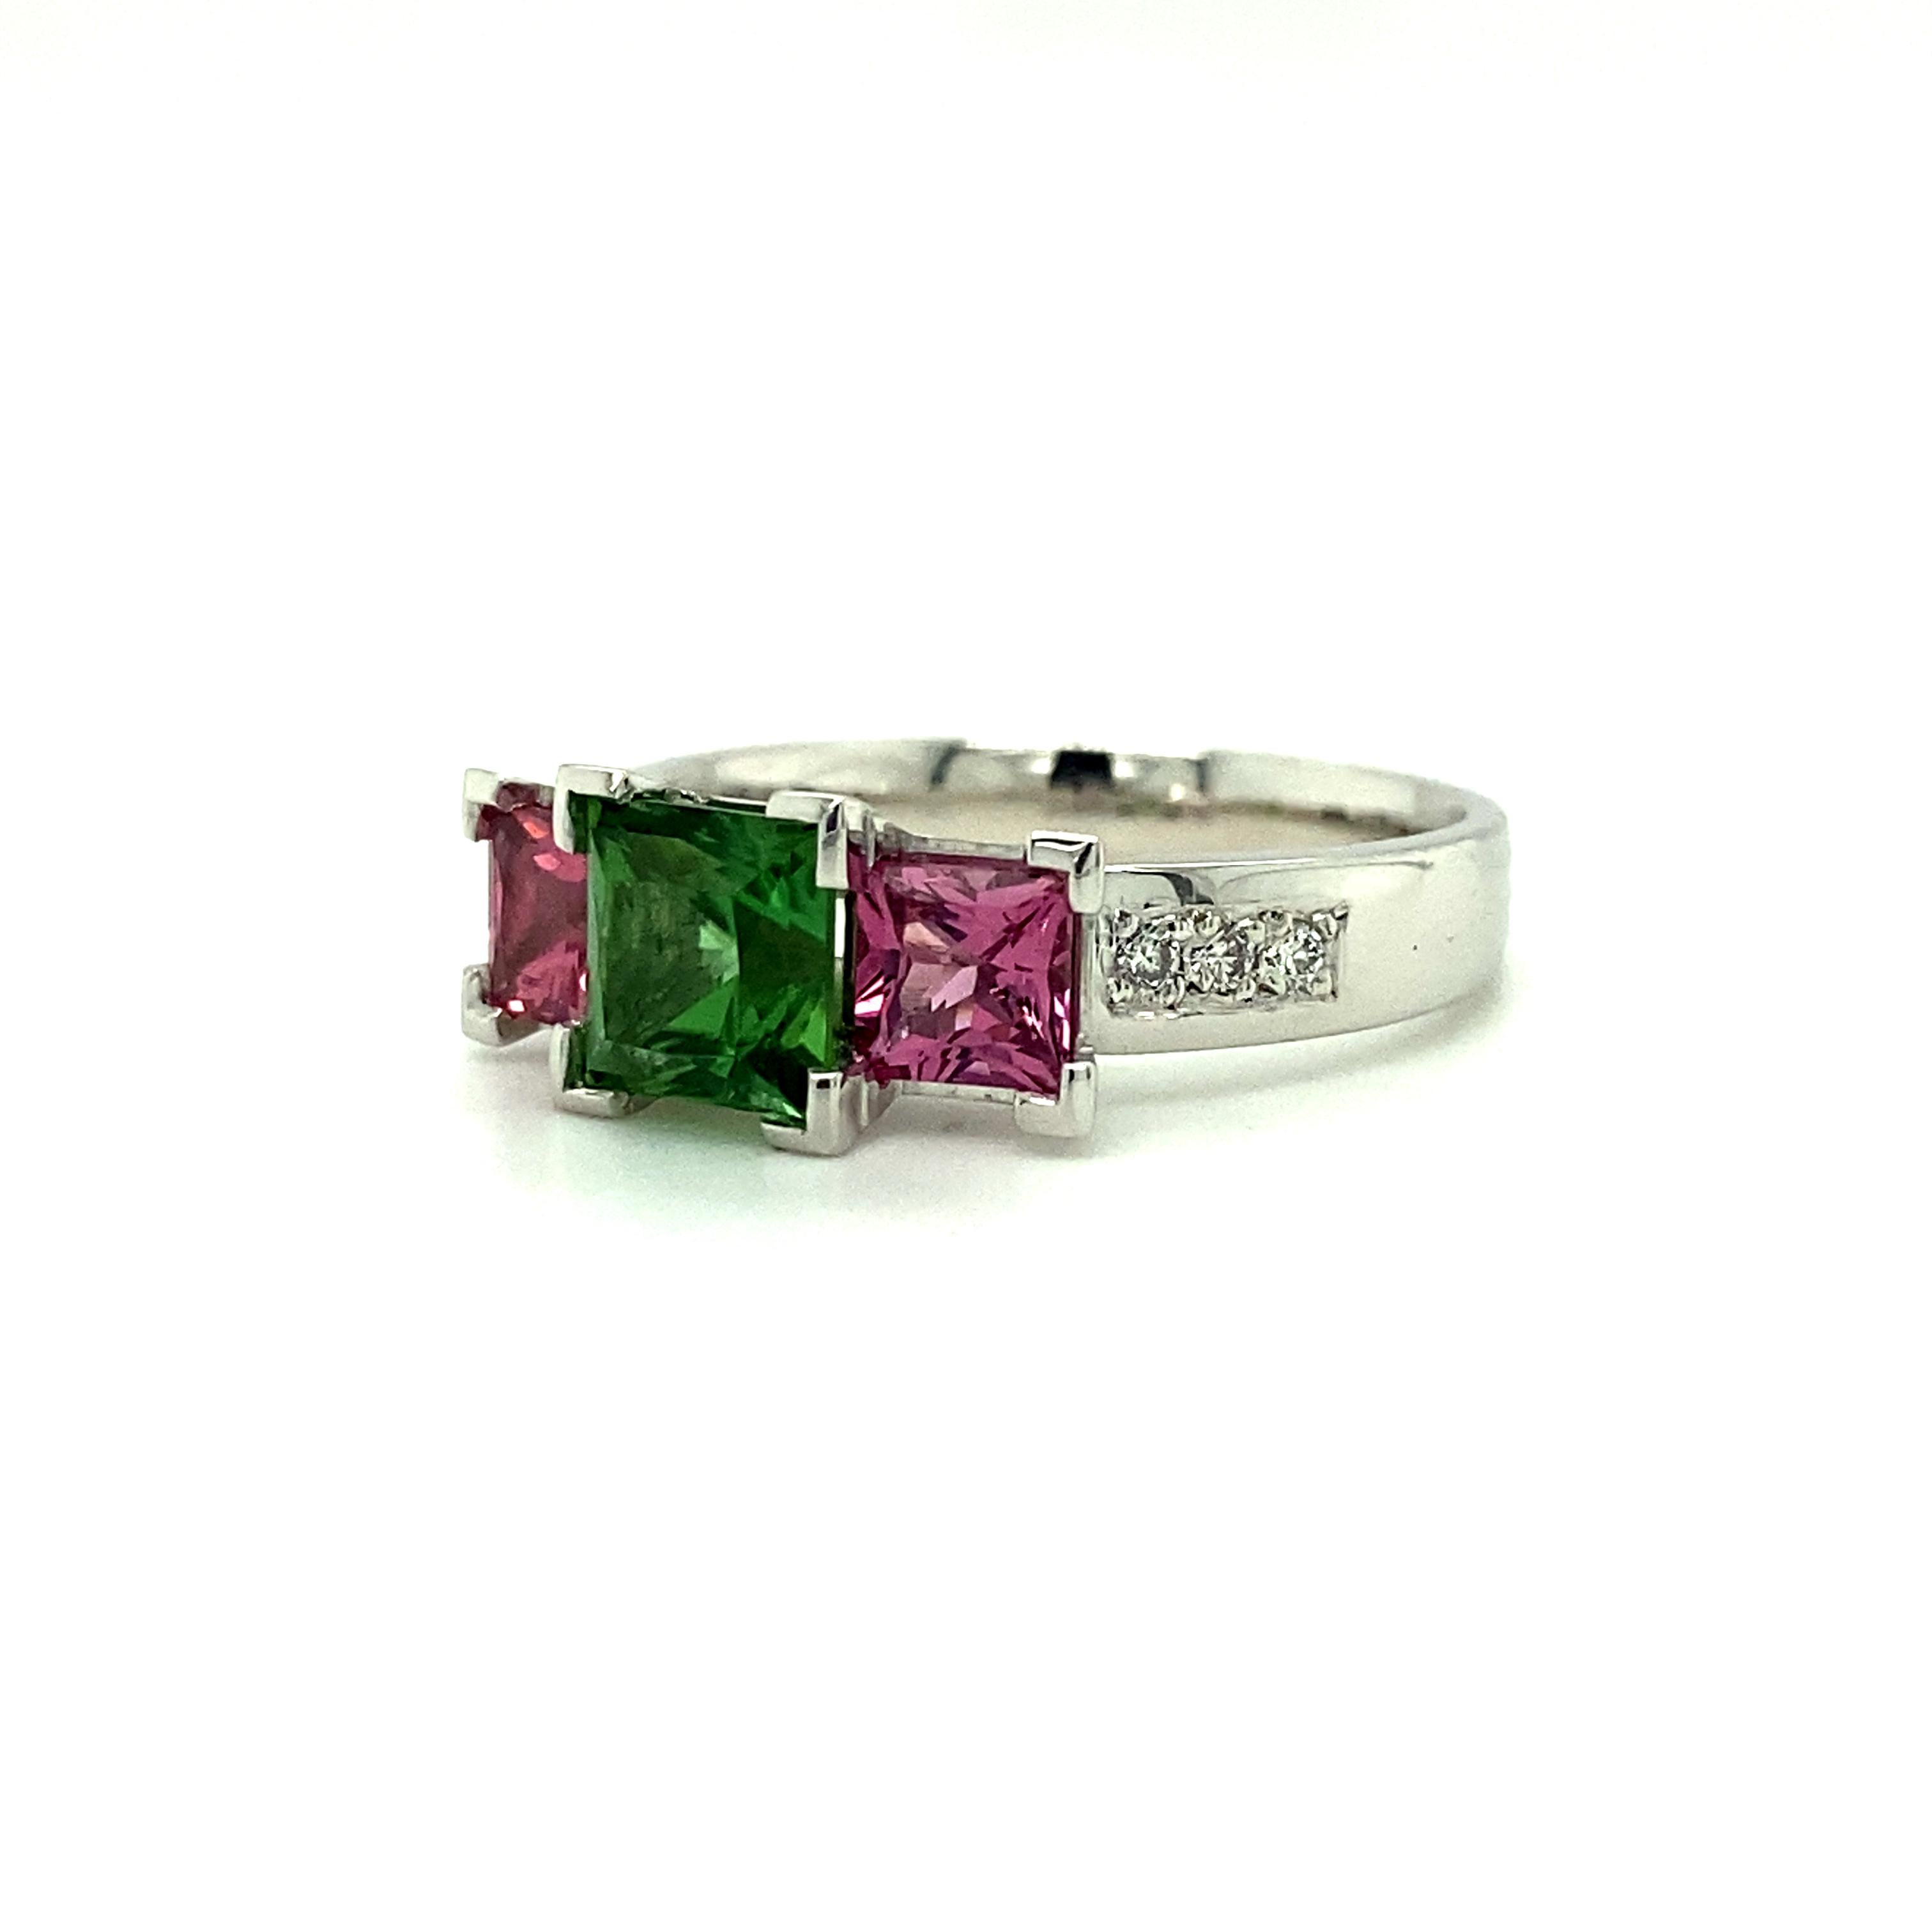 If you love a real pop of colour then you are going to adore this 1.34 Carat Tourmaline 1.08 Carat Spinel Diamond 18 Carat White Gold Ring.

The shades of green tourmaline and pink spinel in princess cuts do compliment each other so well and the